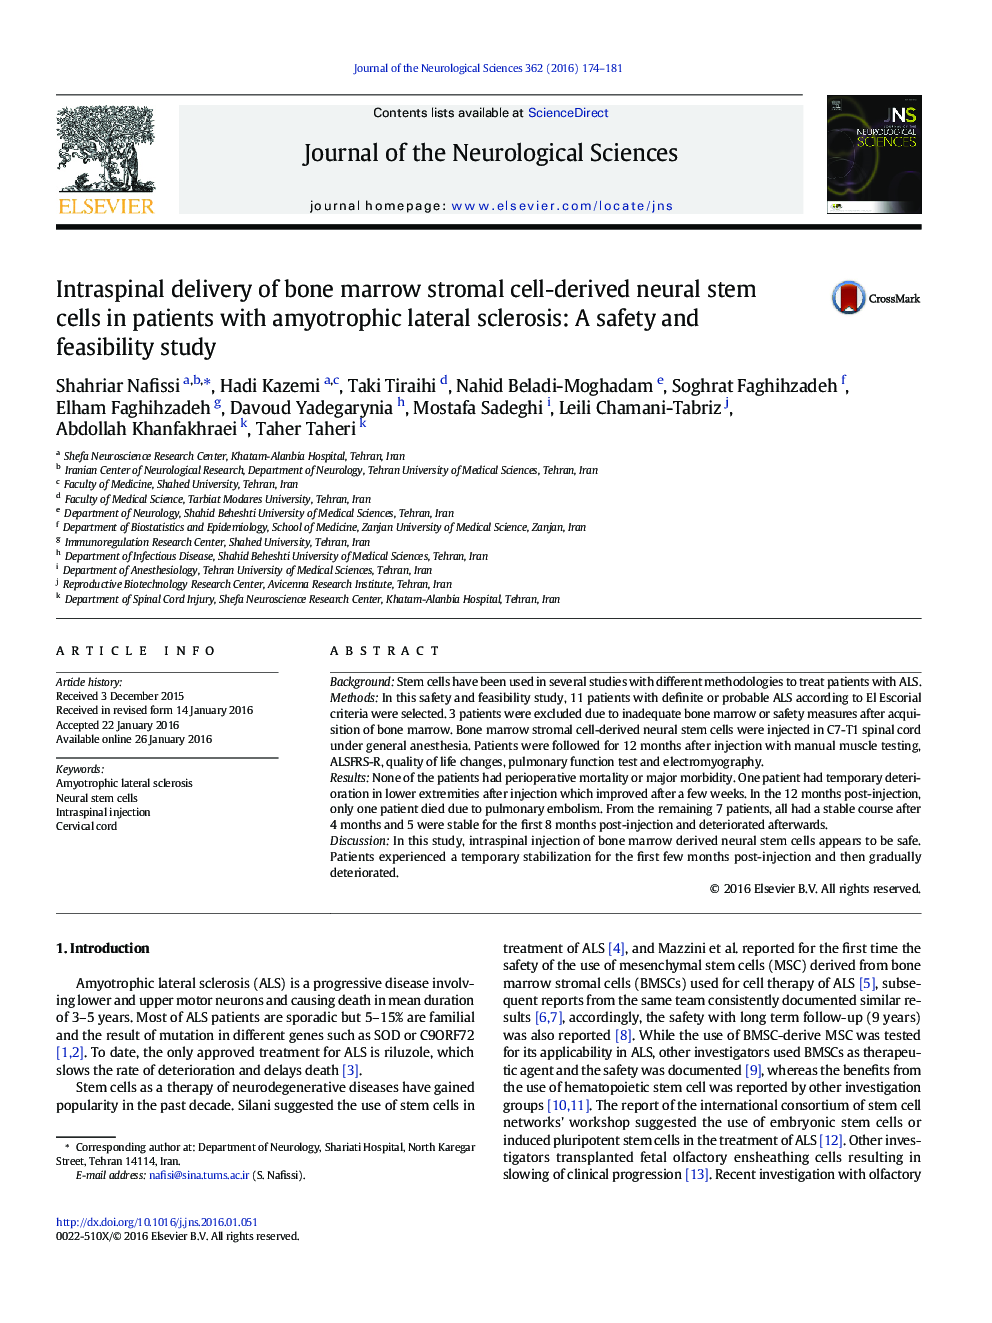 Intraspinal delivery of bone marrow stromal cell-derived neural stem cells in patients with amyotrophic lateral sclerosis: A safety and feasibility study